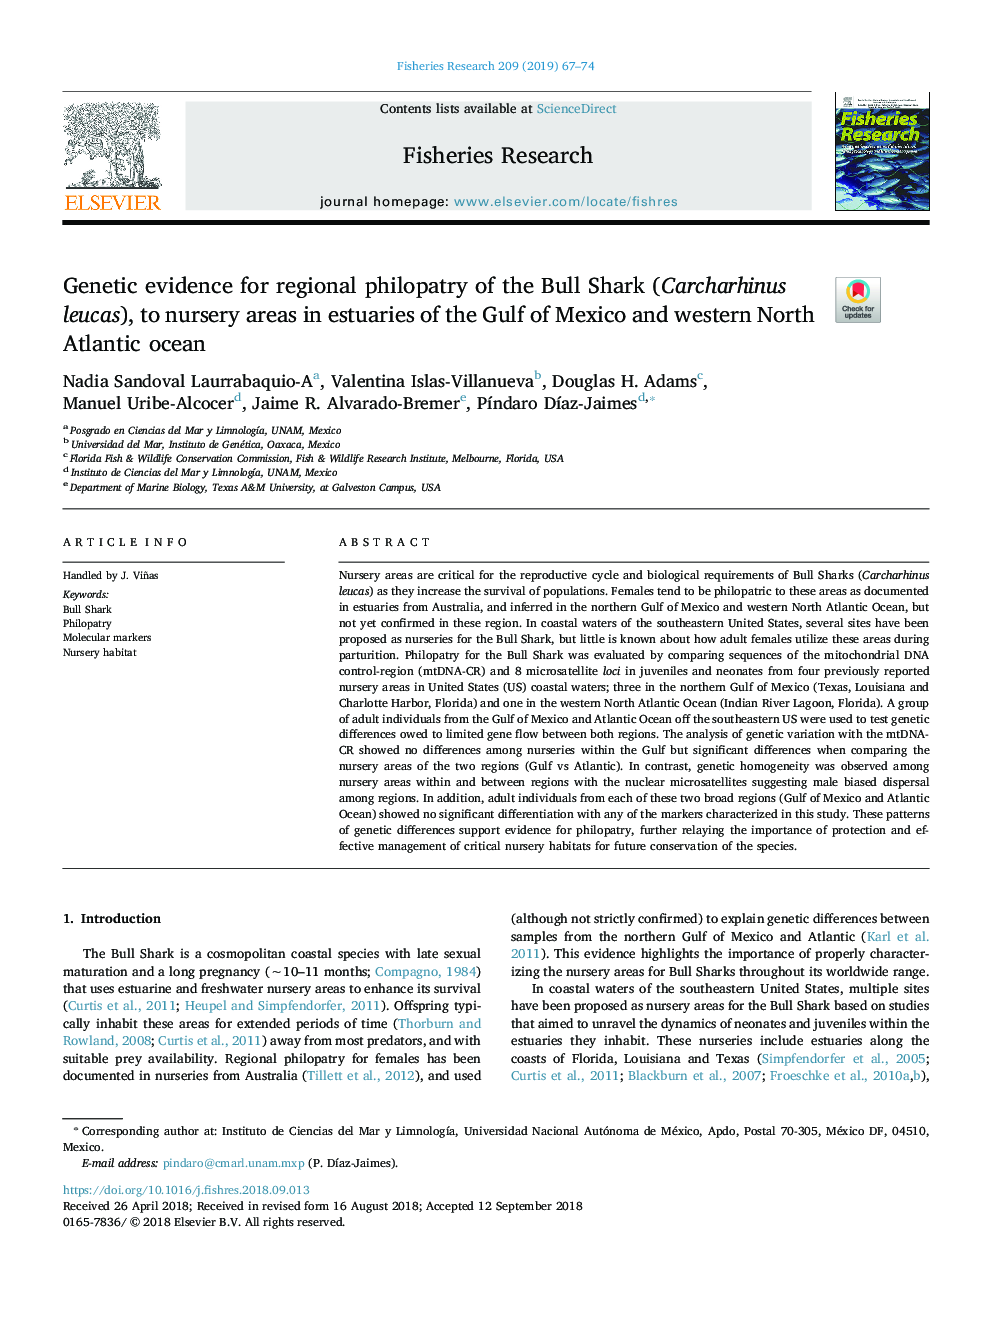 Genetic evidence for regional philopatry of the Bull Shark (Carcharhinus leucas), to nursery areas in estuaries of the Gulf of Mexico and western North Atlantic ocean